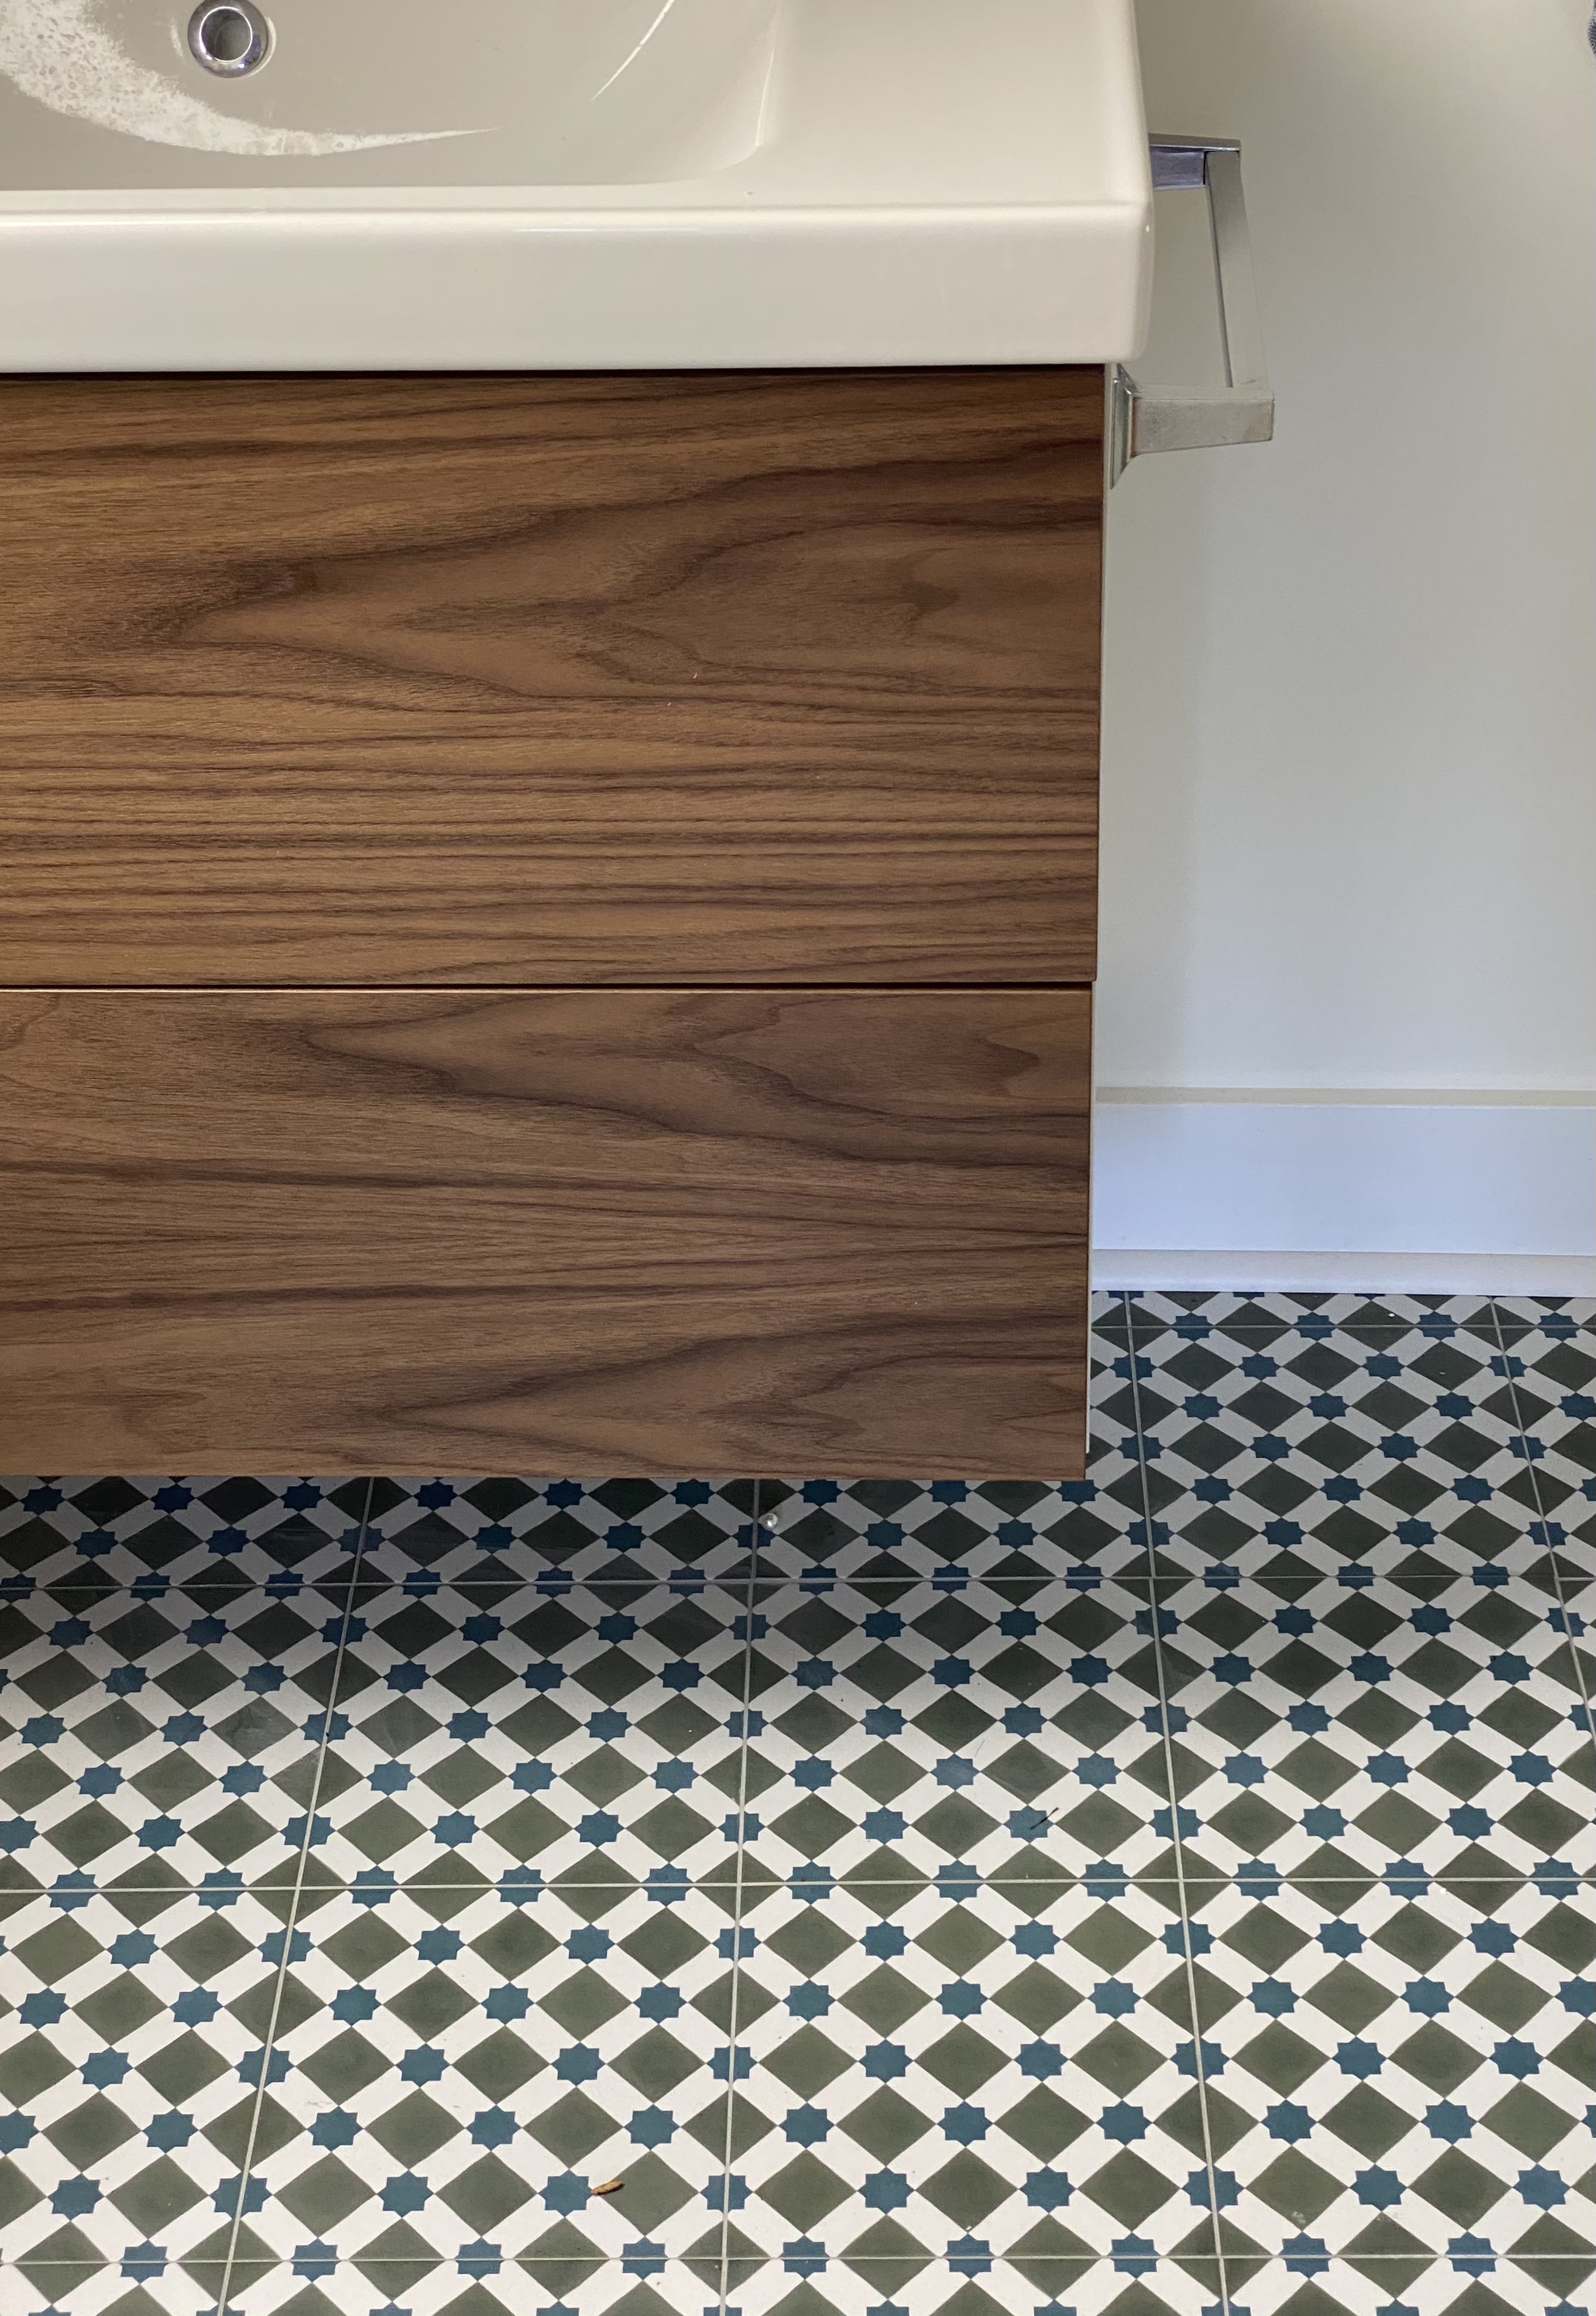 blue and green patterned floor tile with walnut front Ikea vanity